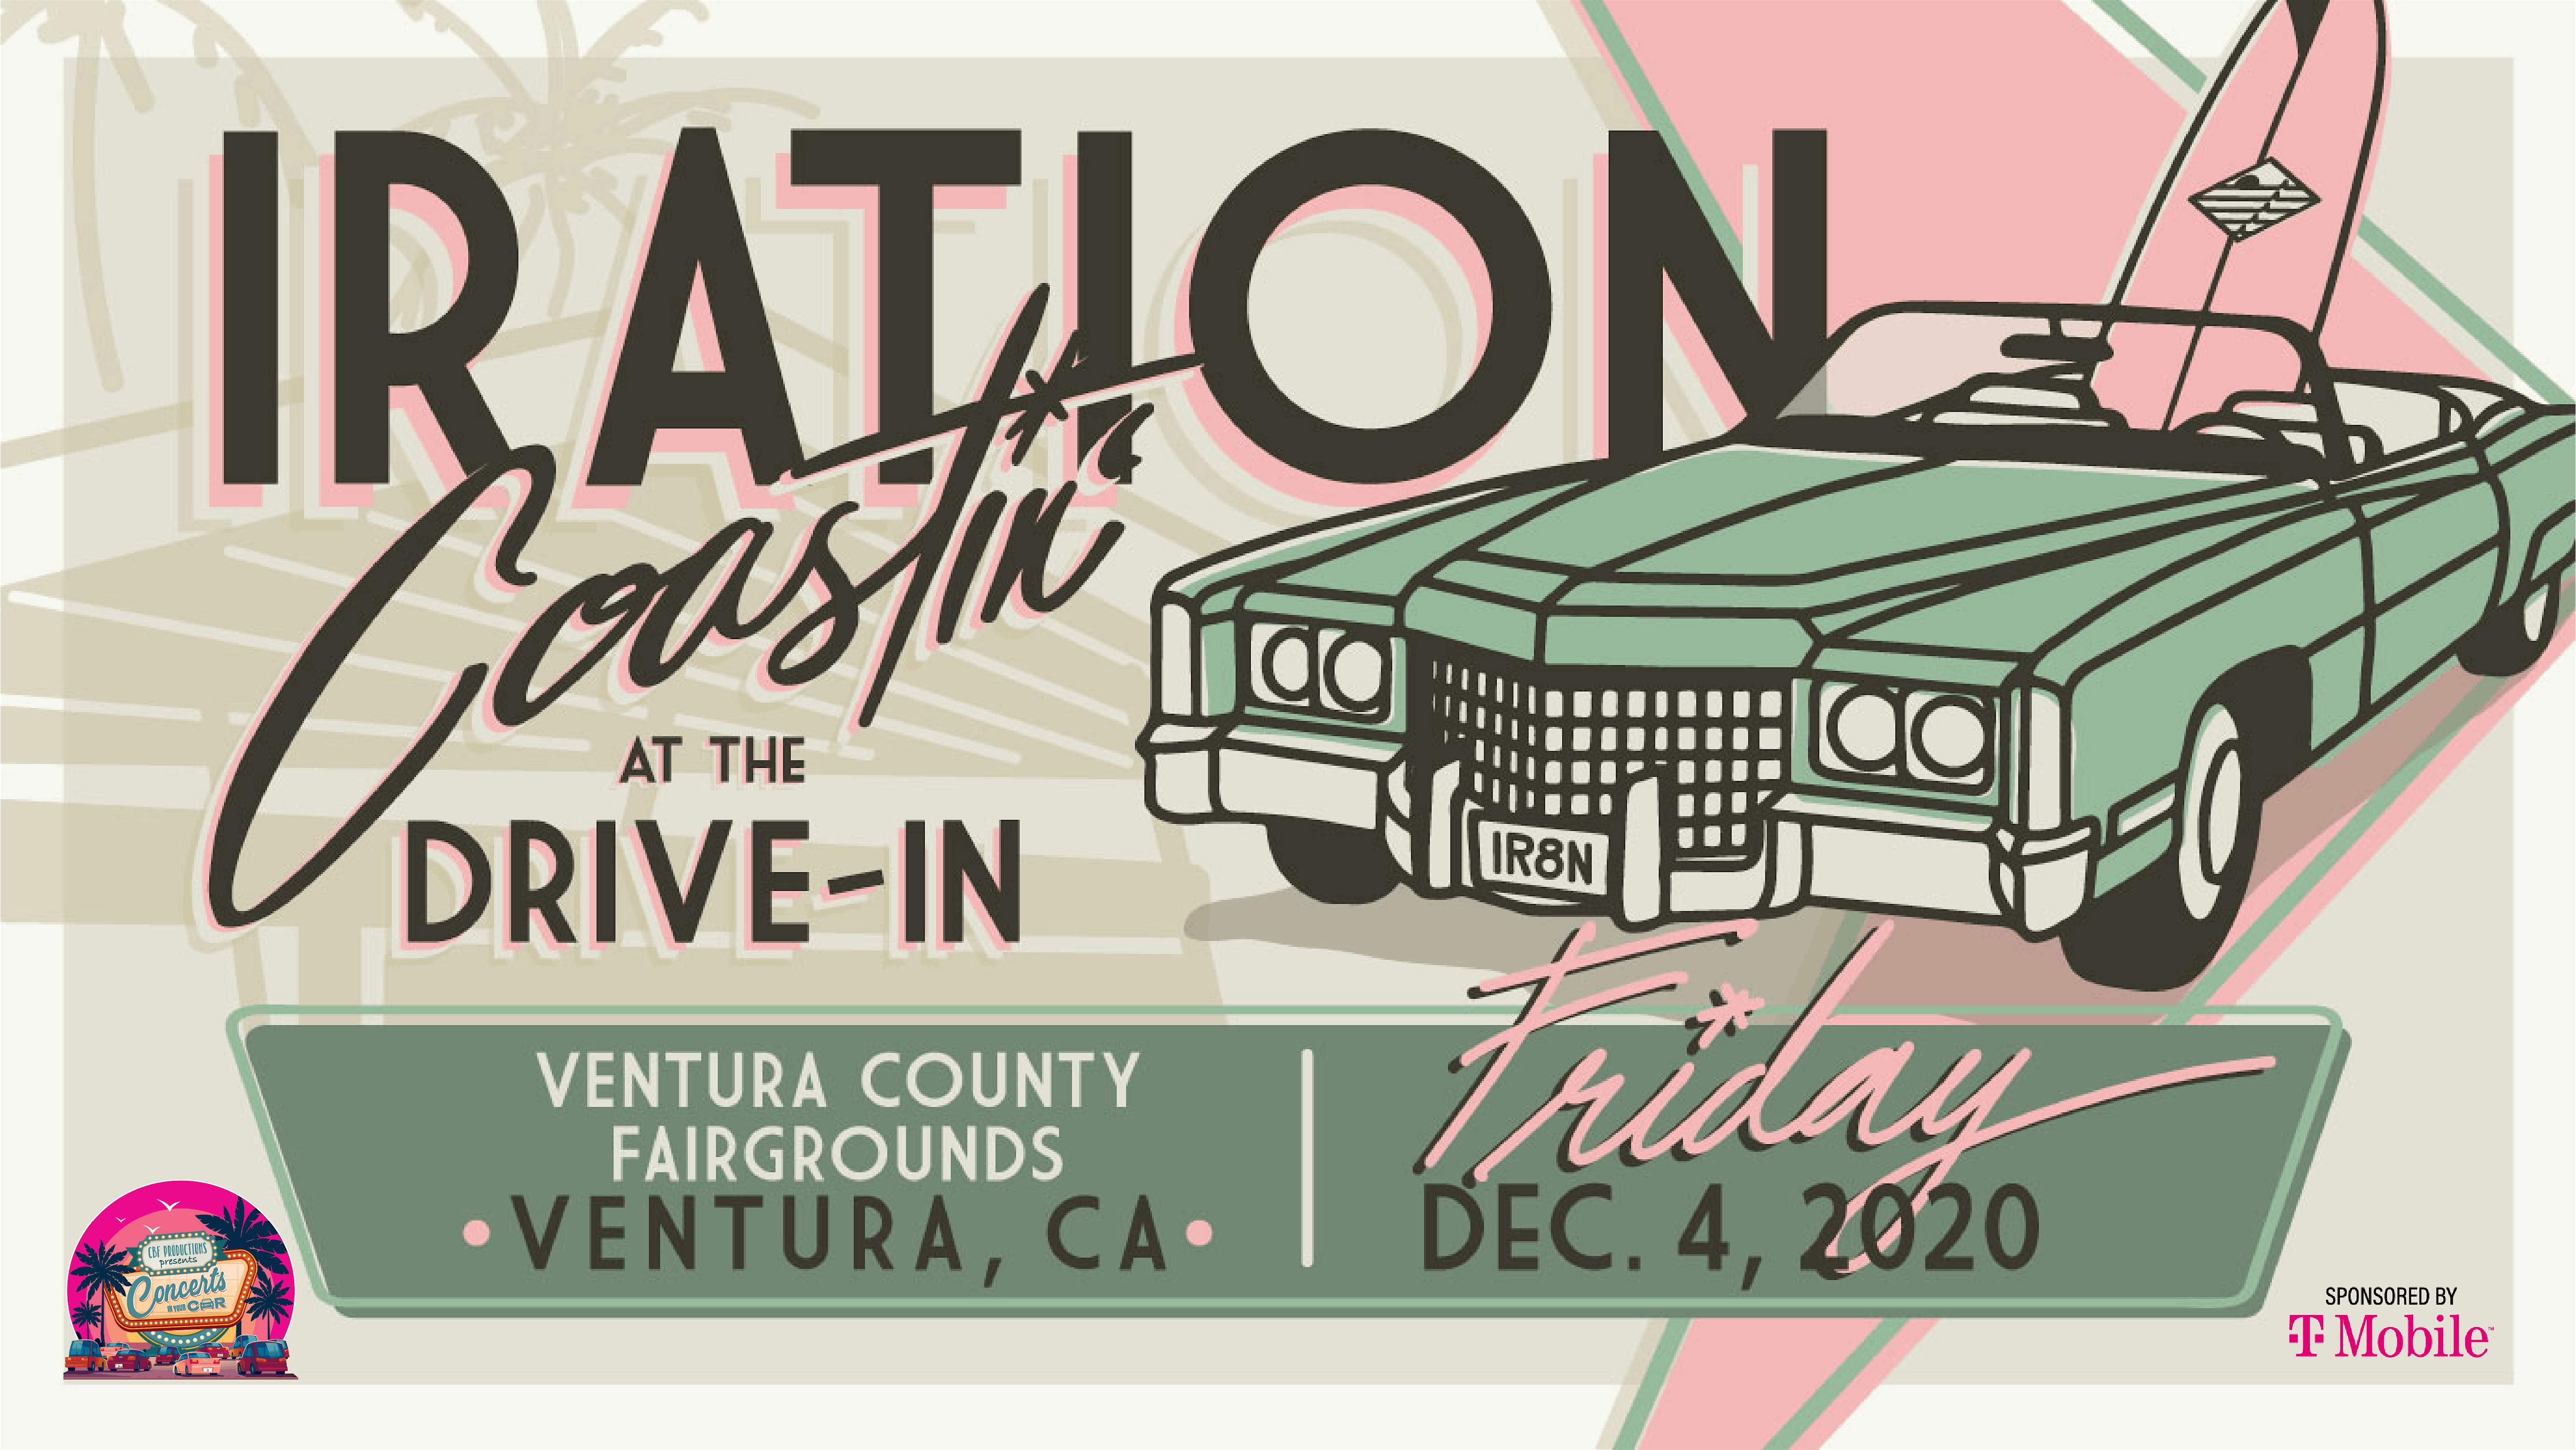 FRI, DEC 4, 2020 - IRATION - VENTURA 7:30 PM - Concerts In Your Car - LIVE ON STAGE